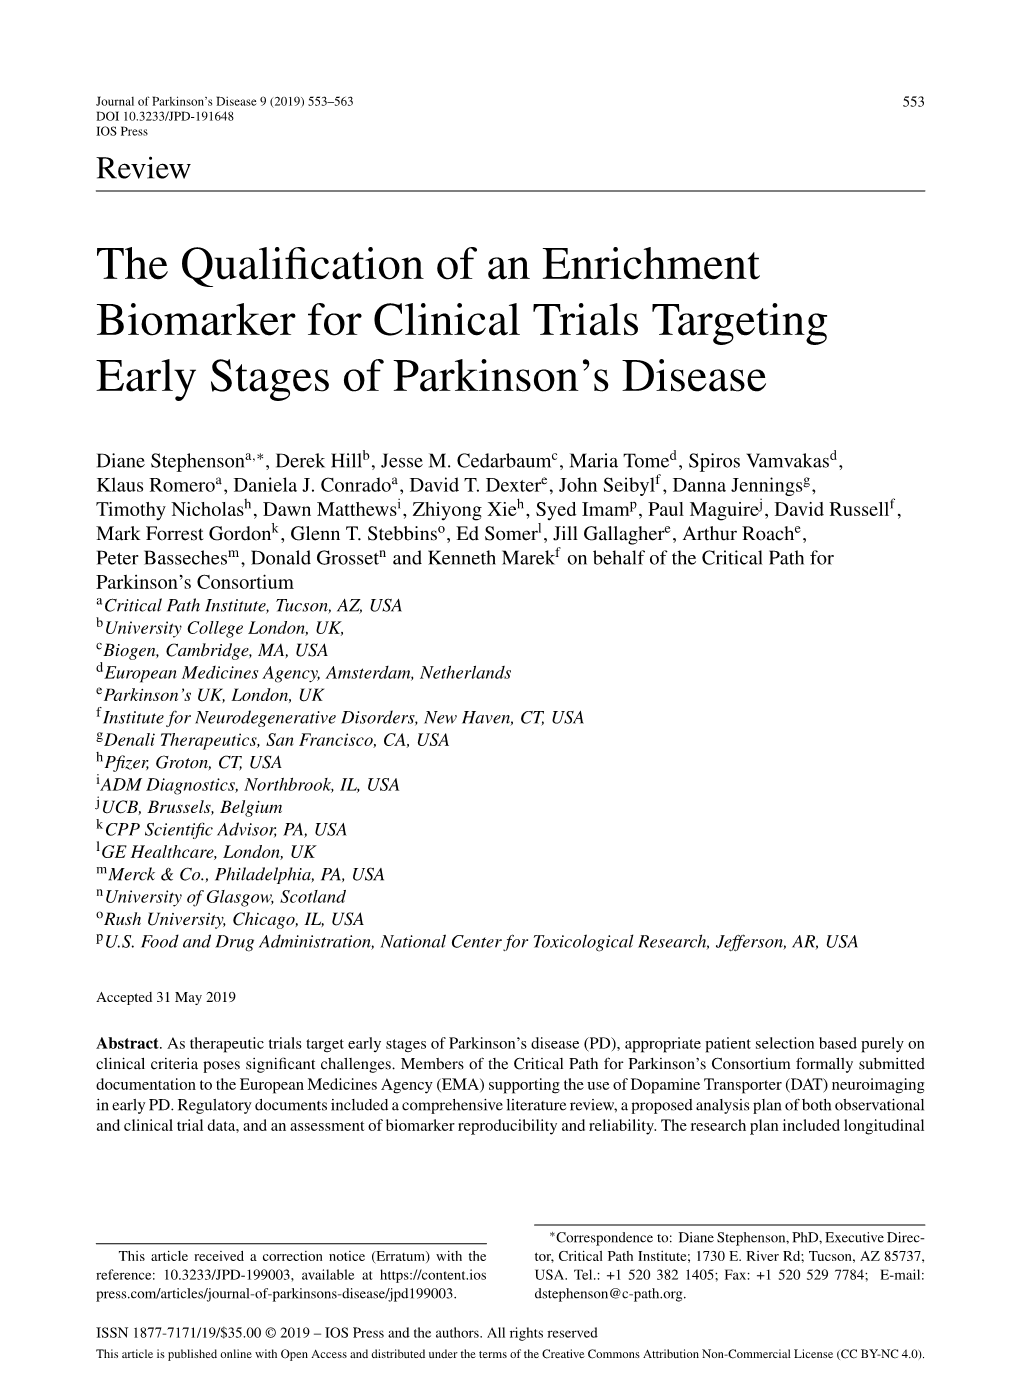 The Qualification of an Enrichment Biomarker for Clinical Trials